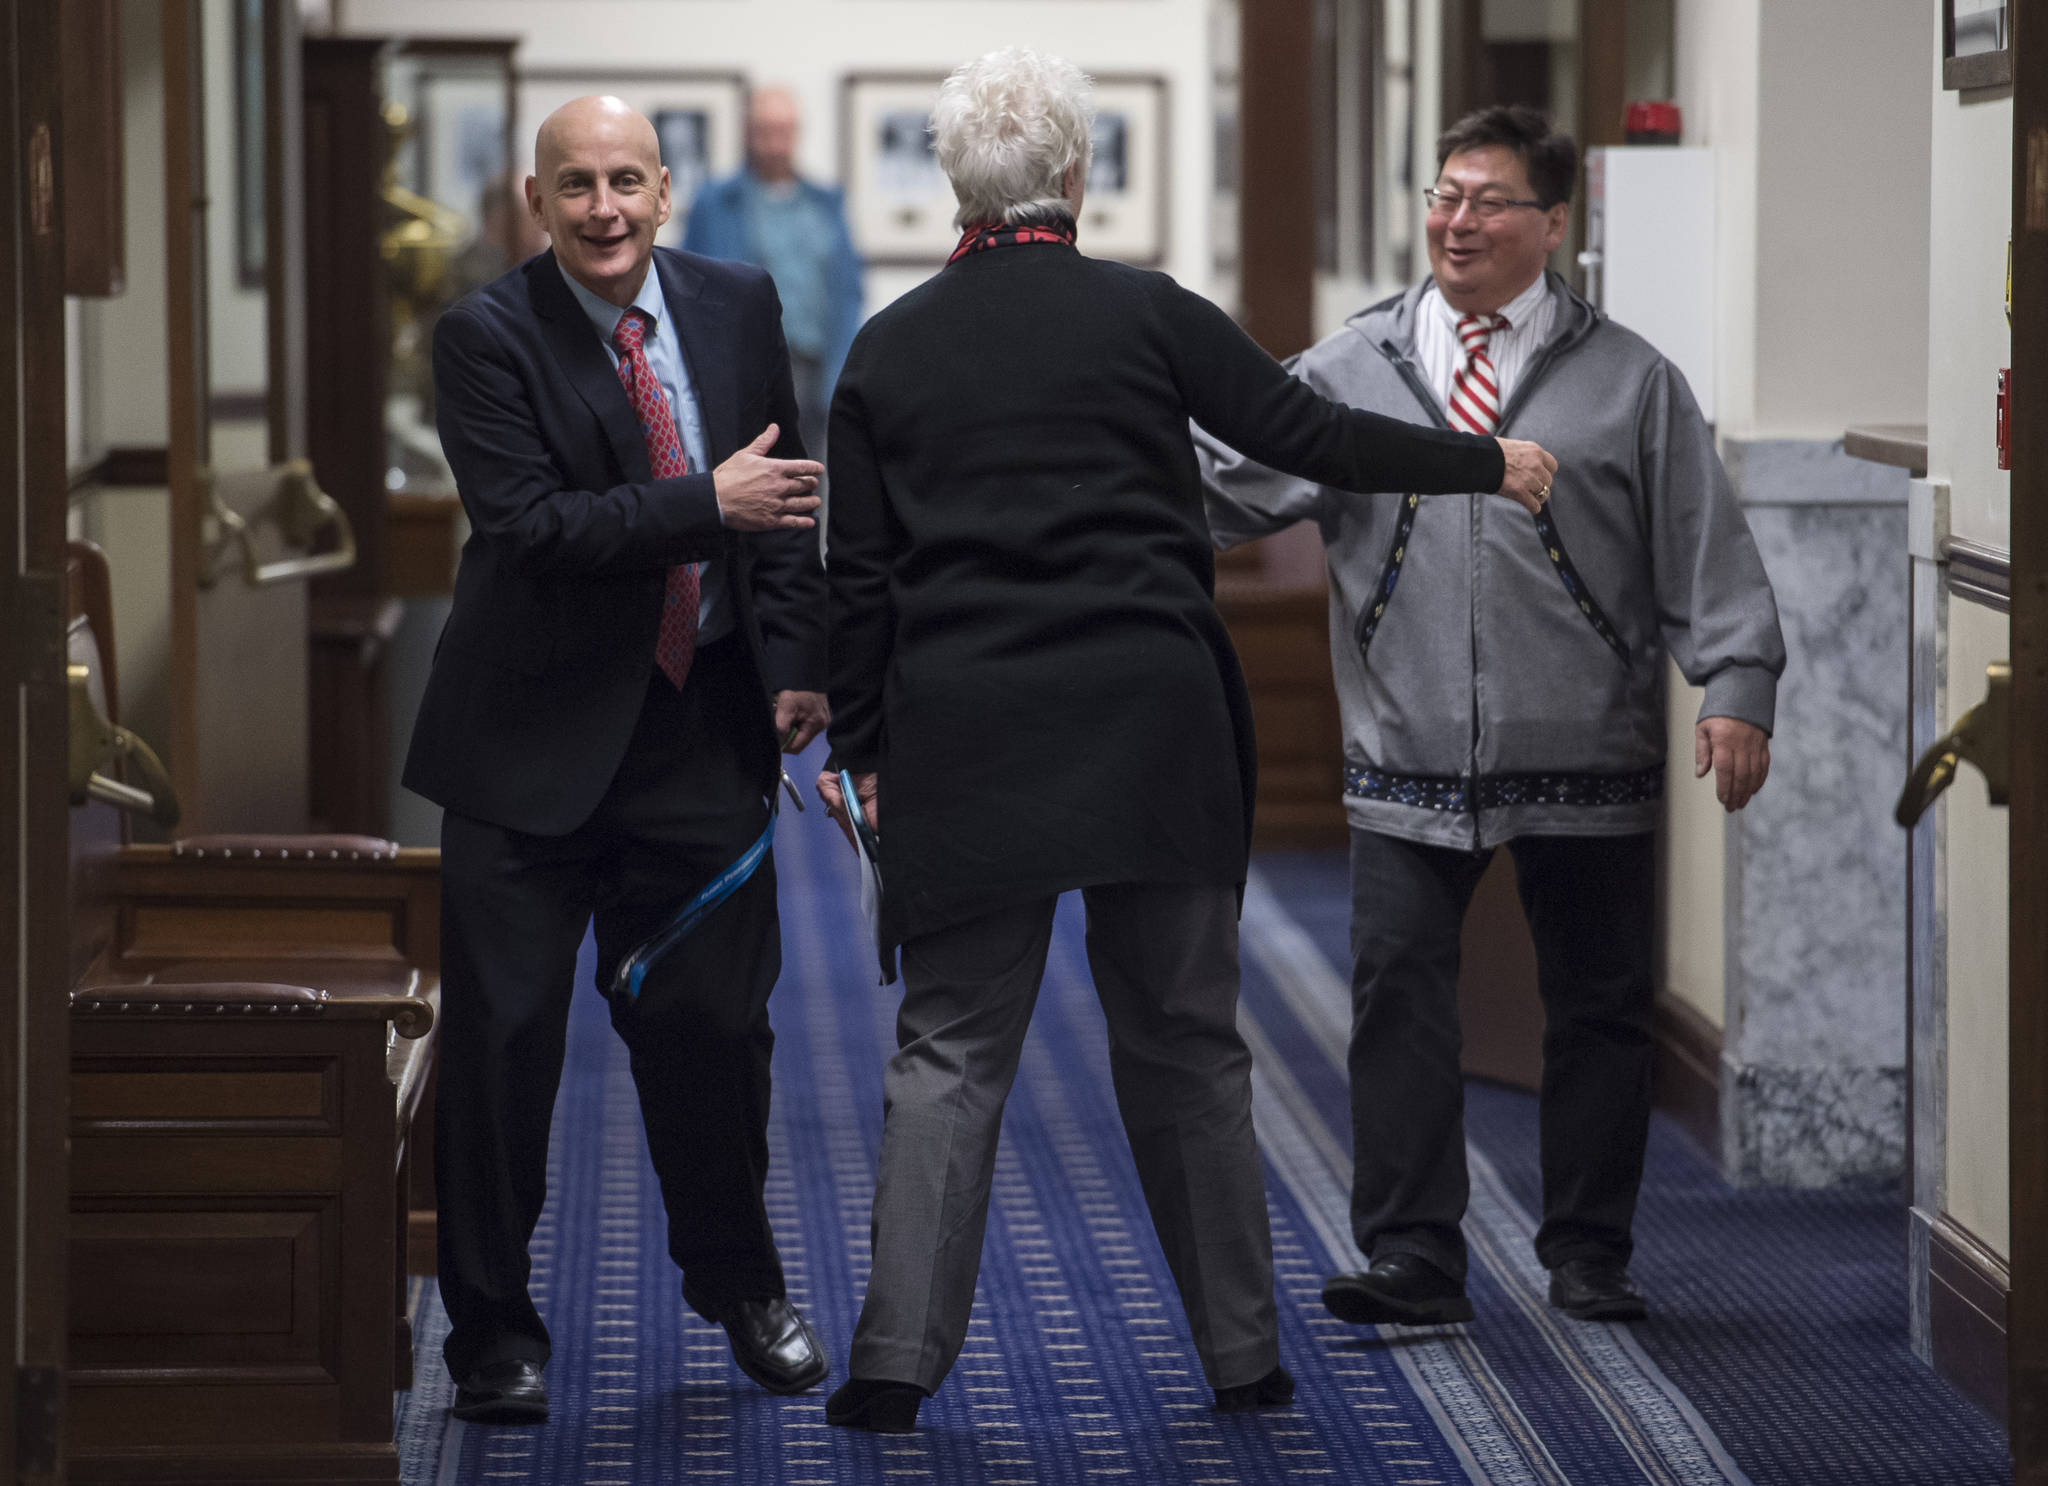 Rep. Daniel Ortiz, NA-Ketchikan, left, Rep. Louise Stutes, R-Kodiak, center, and Rep. Dean Westlake, D-Kotzebue, greet each other on the first day of the fourth Special Session of the 30th Alaska Legisture on Monday, Oct. 23, 2017.